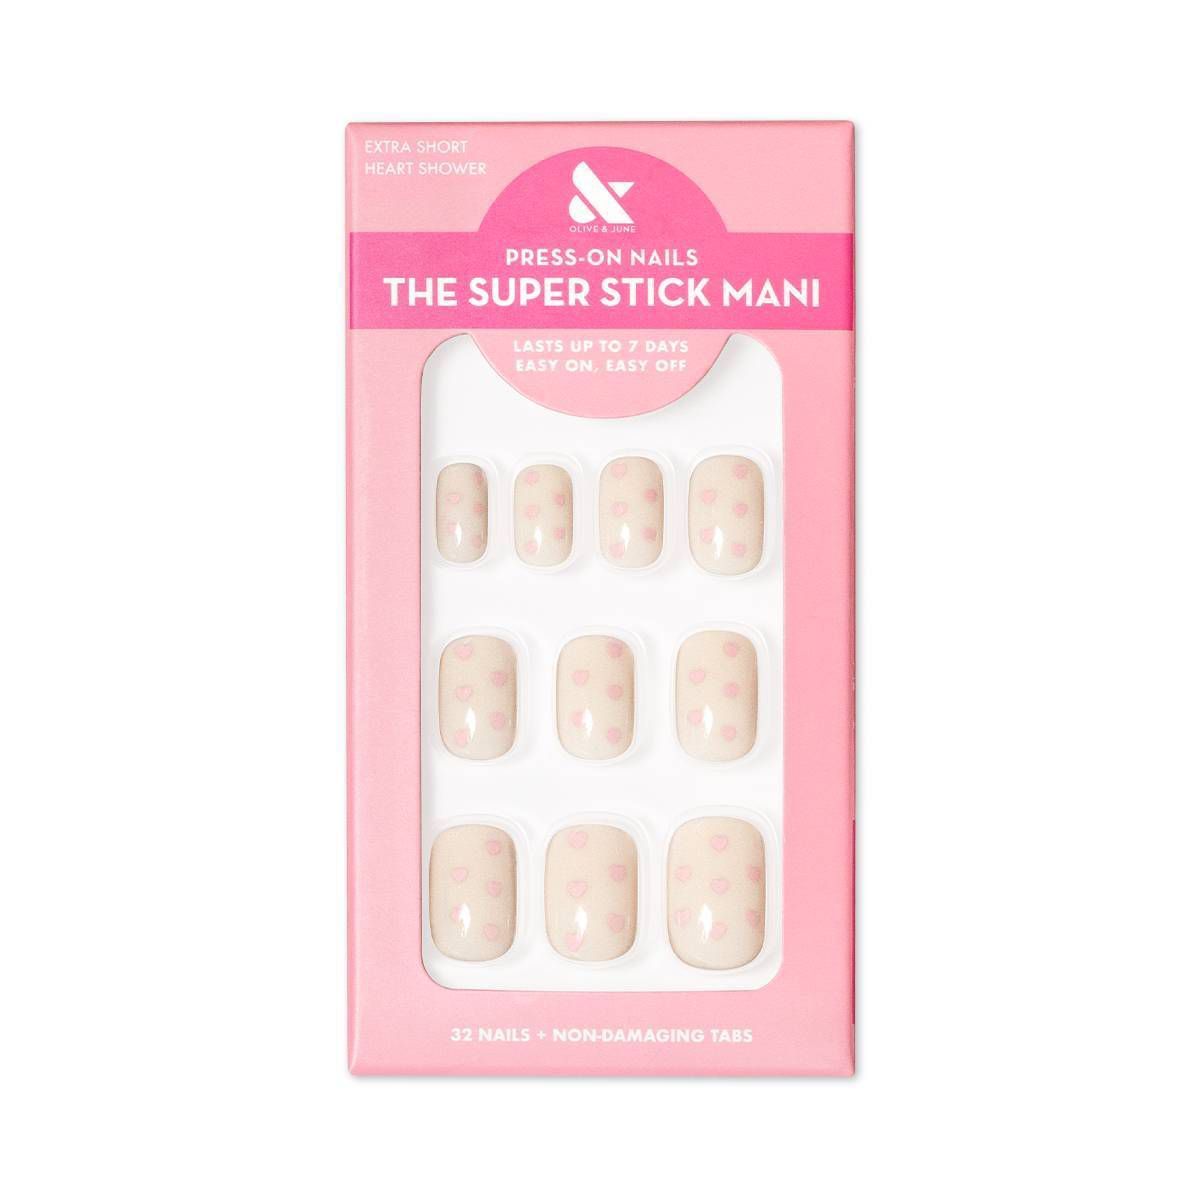 Olive & June Press On Nail Tabs - XS Squoval - Heart Shower - 32ct | Target